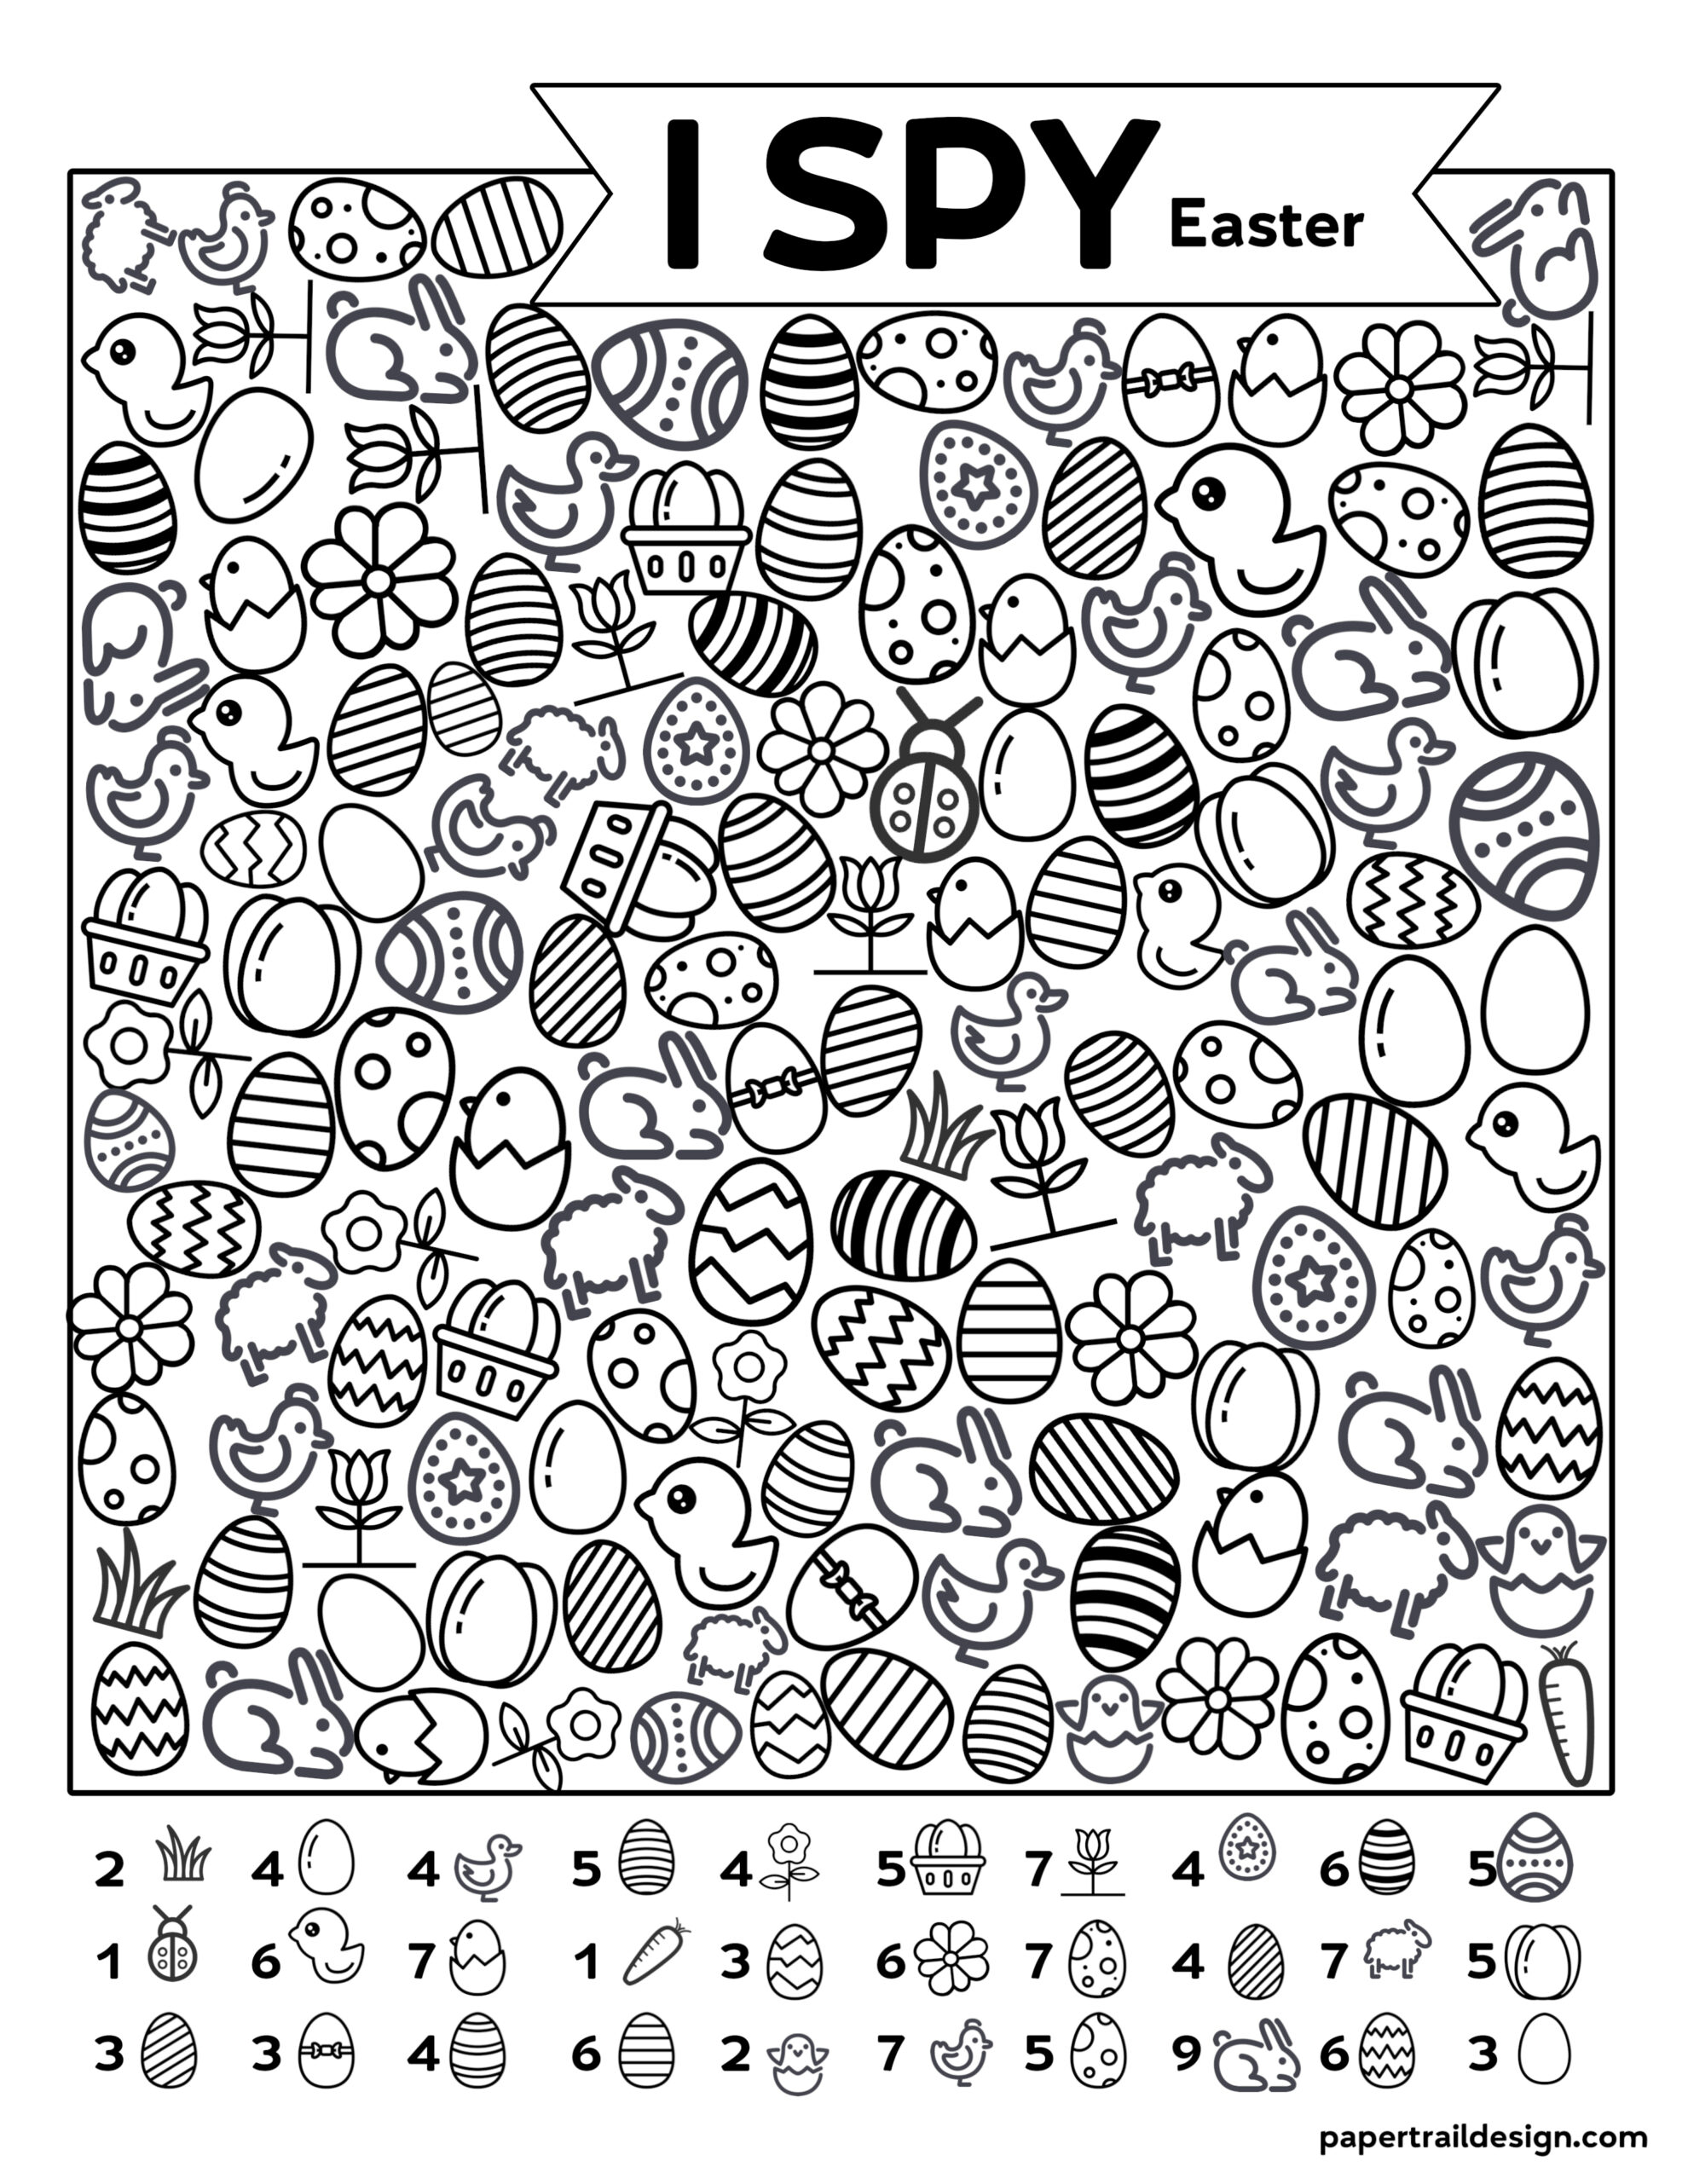 44-i-spy-coloring-pages-printable-spy-coloring-pages